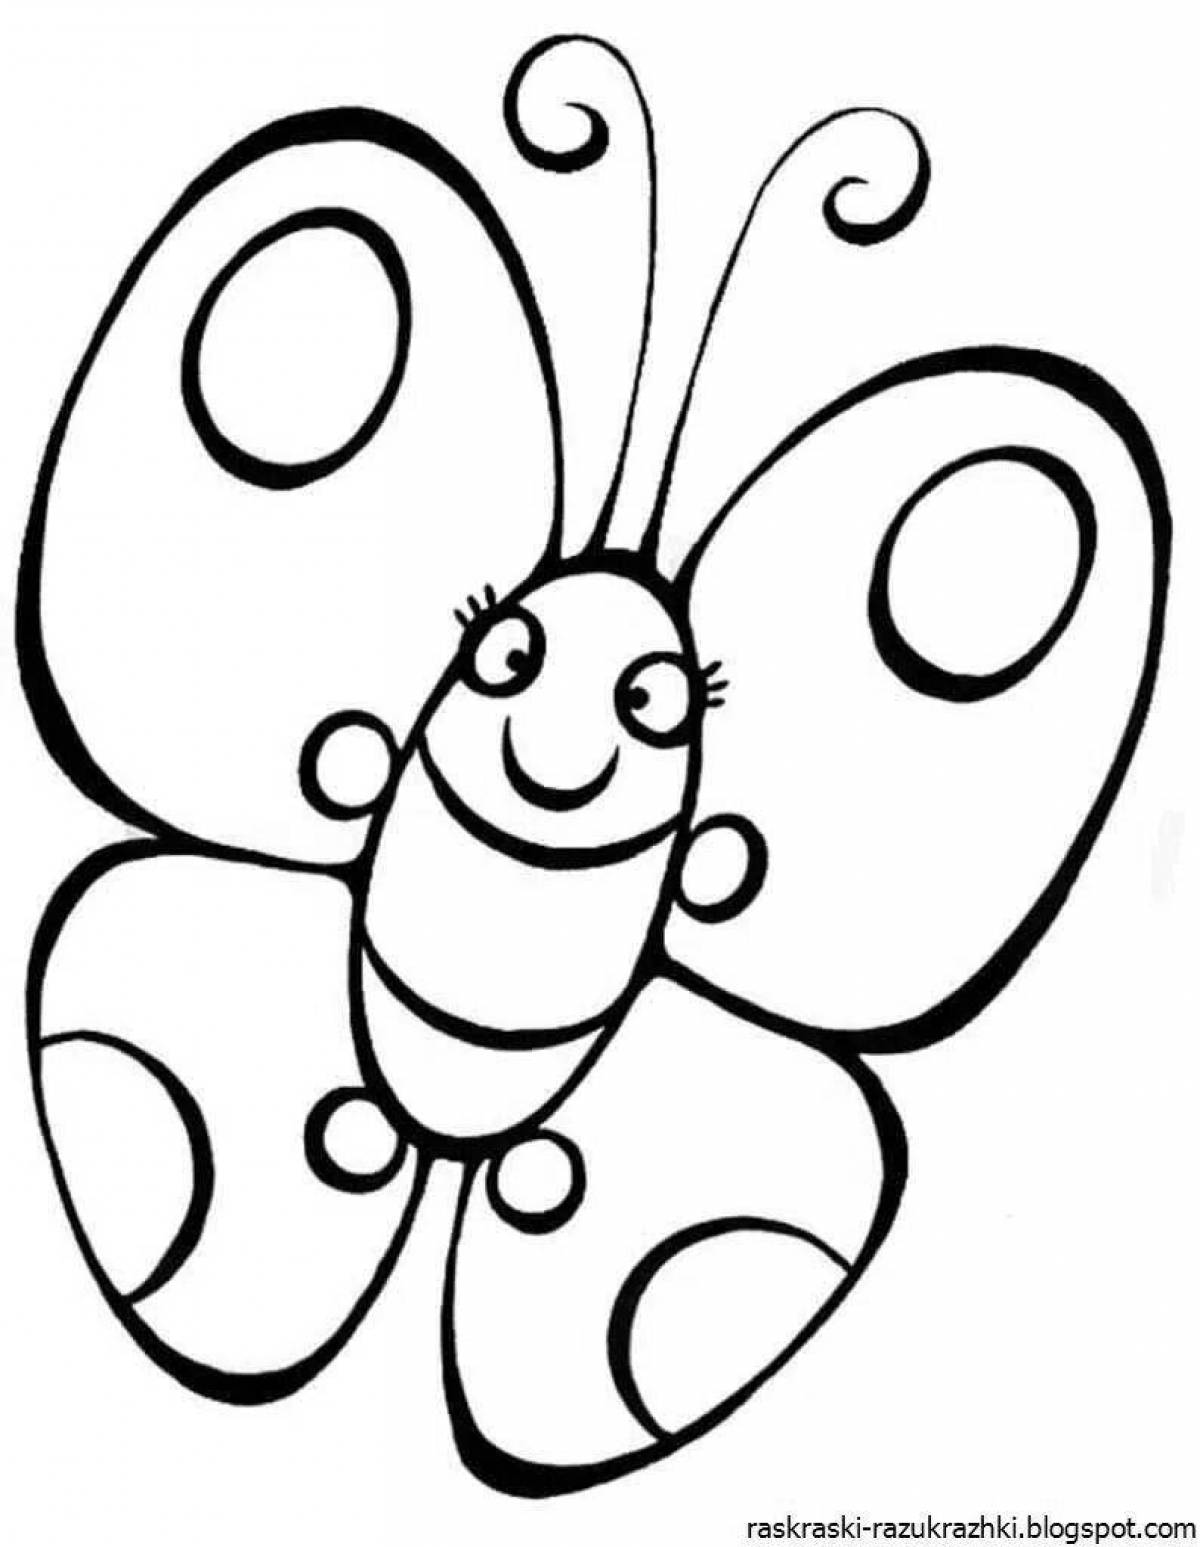 Violent butterfly coloring book for kids